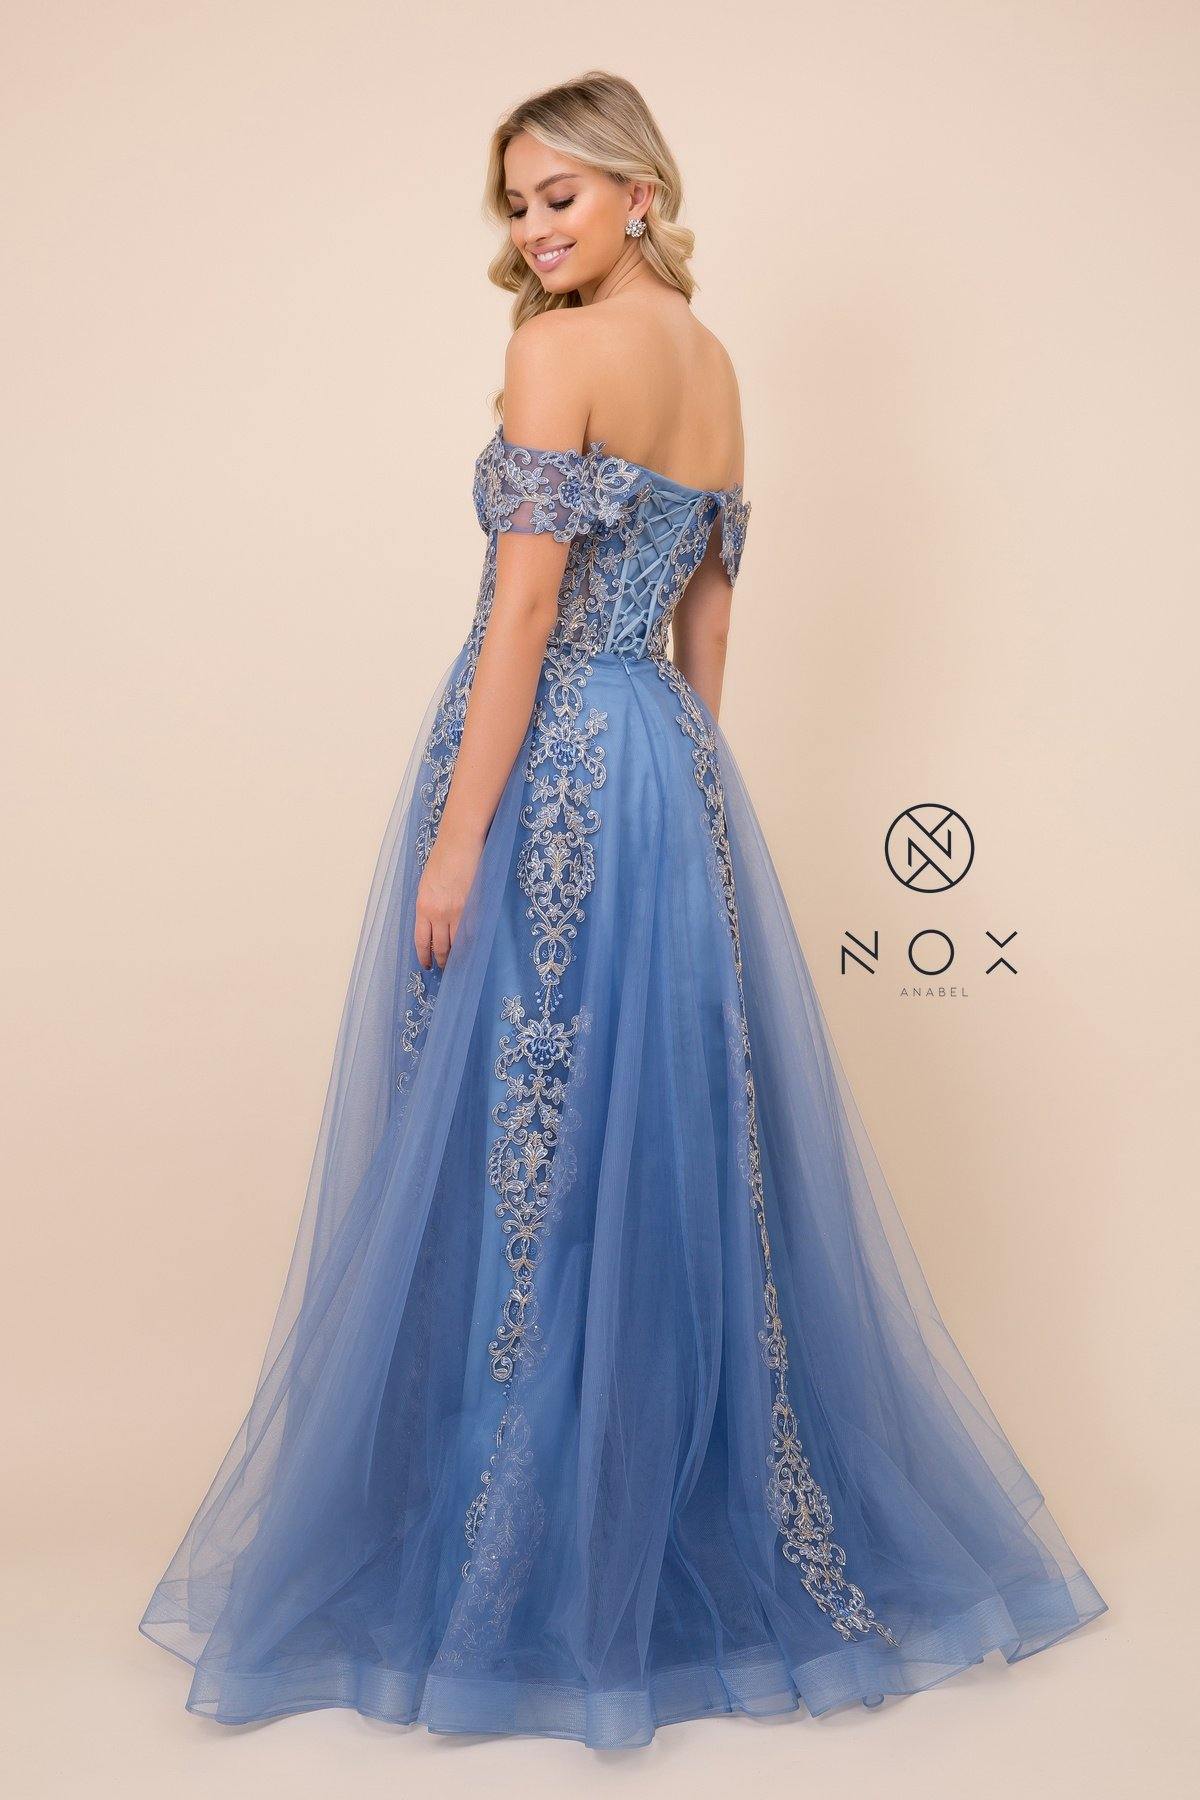 Embroidered Long Prom Dress Evening Gown - The Dress Outlet Nox Anabel